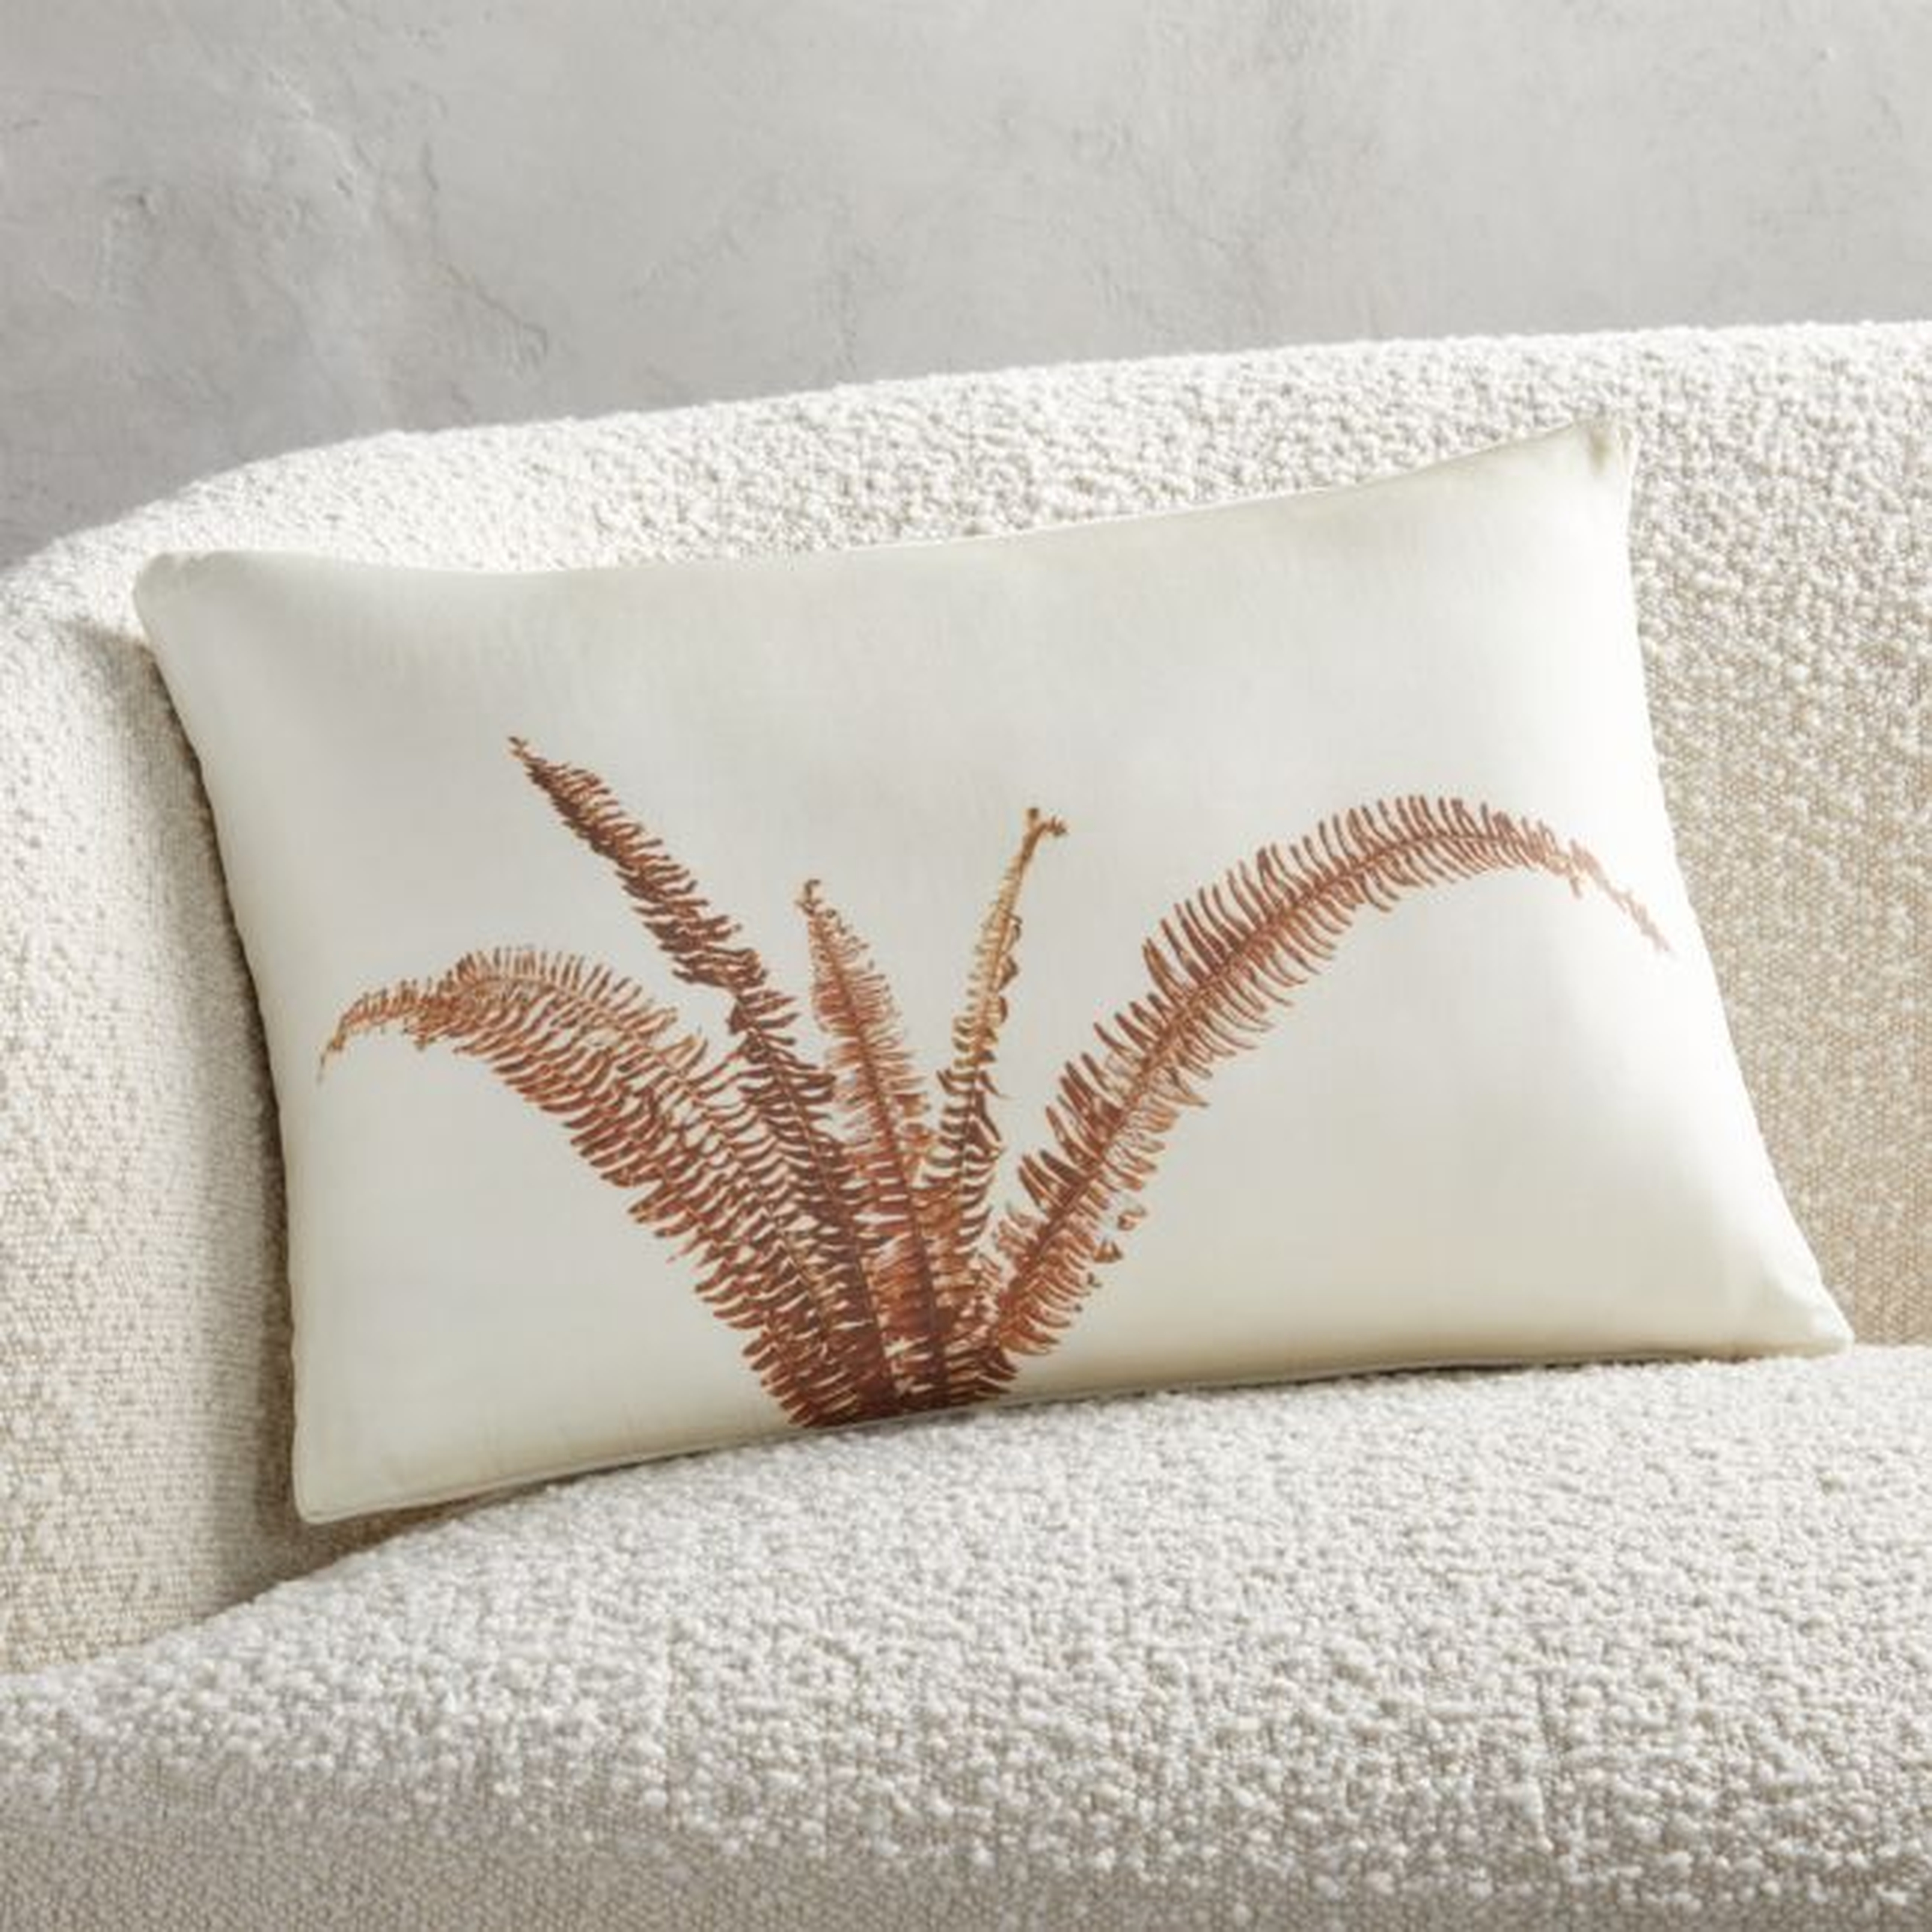 18"x12" Tansy Leaf Pillow with Down-Alternative Insert - CB2